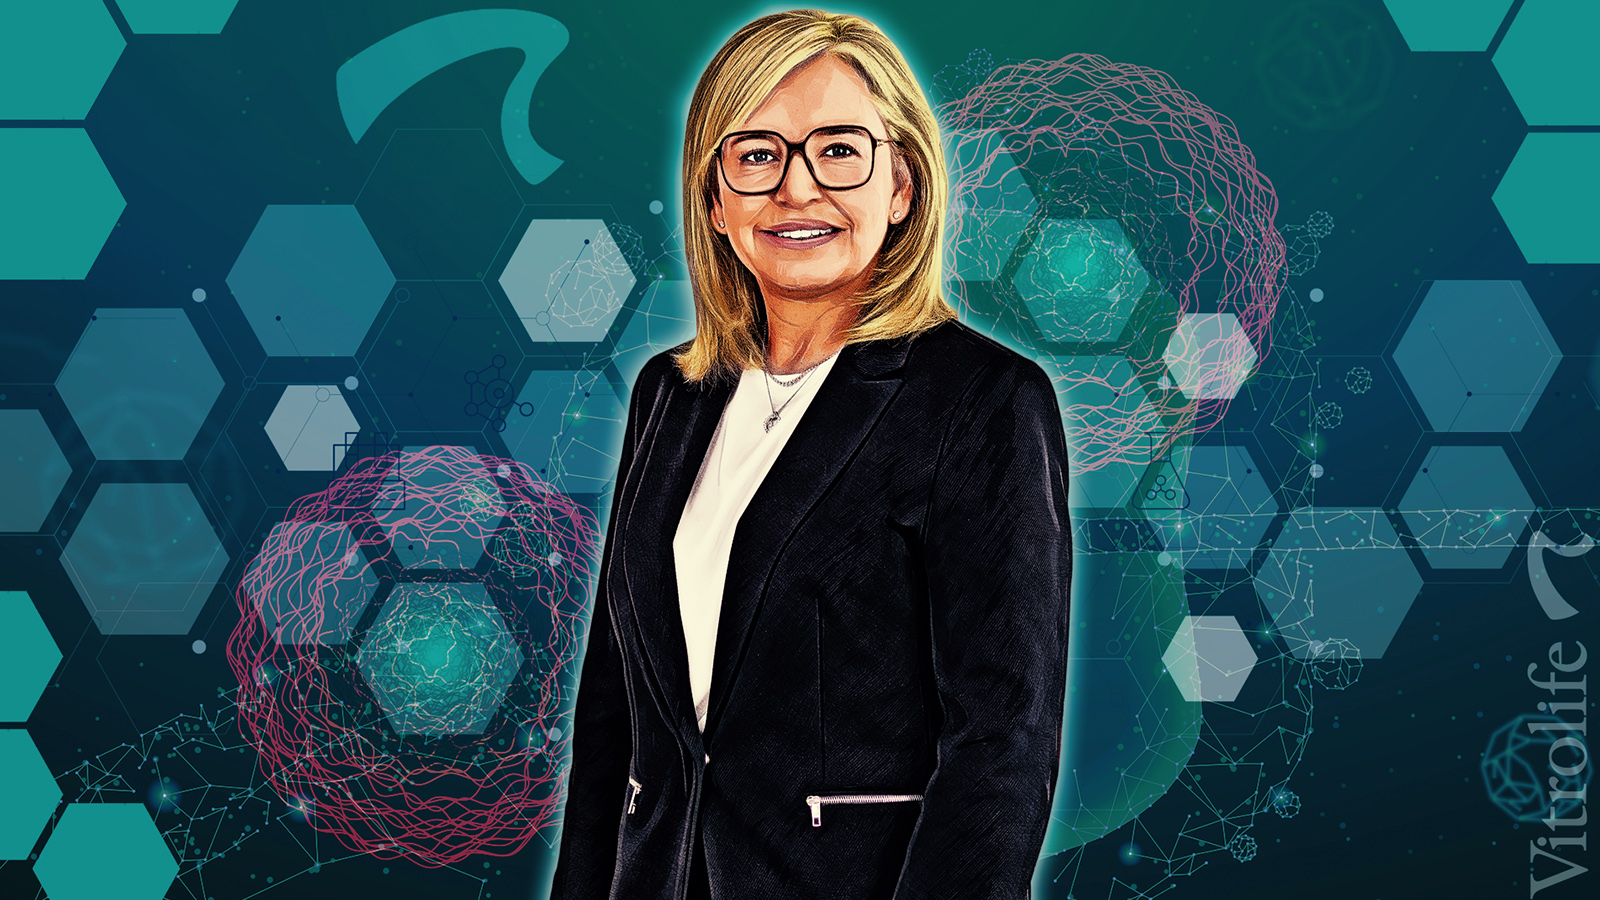 Bronwyn Brophy is possibly the only Irish-born female chief executive of a publicly traded company in the world at the moment